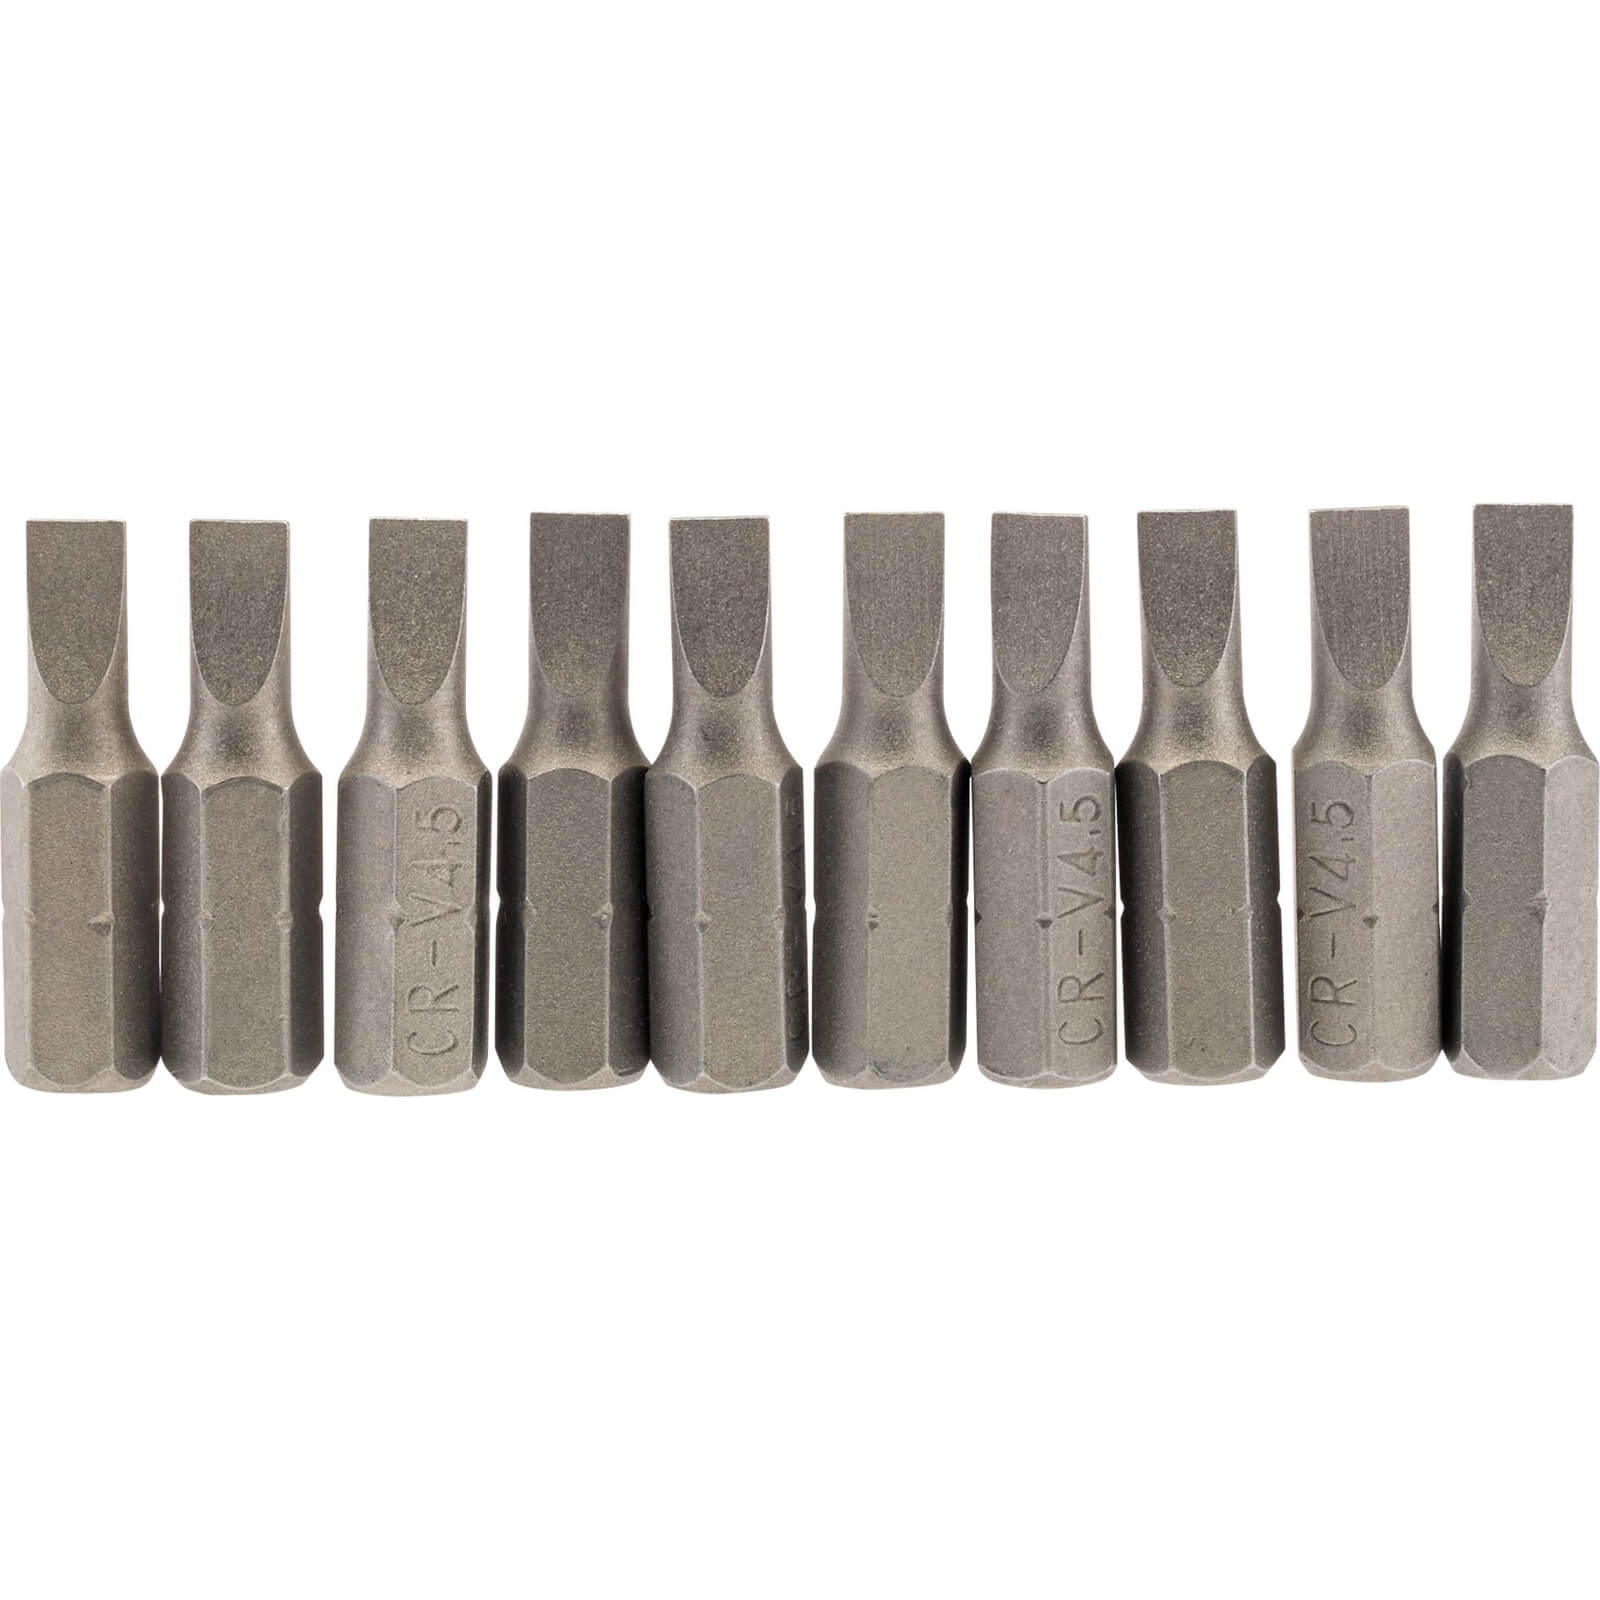 Image of Draper Slotted Screwdriver Bit 4.5mm 25mm Pack of 10